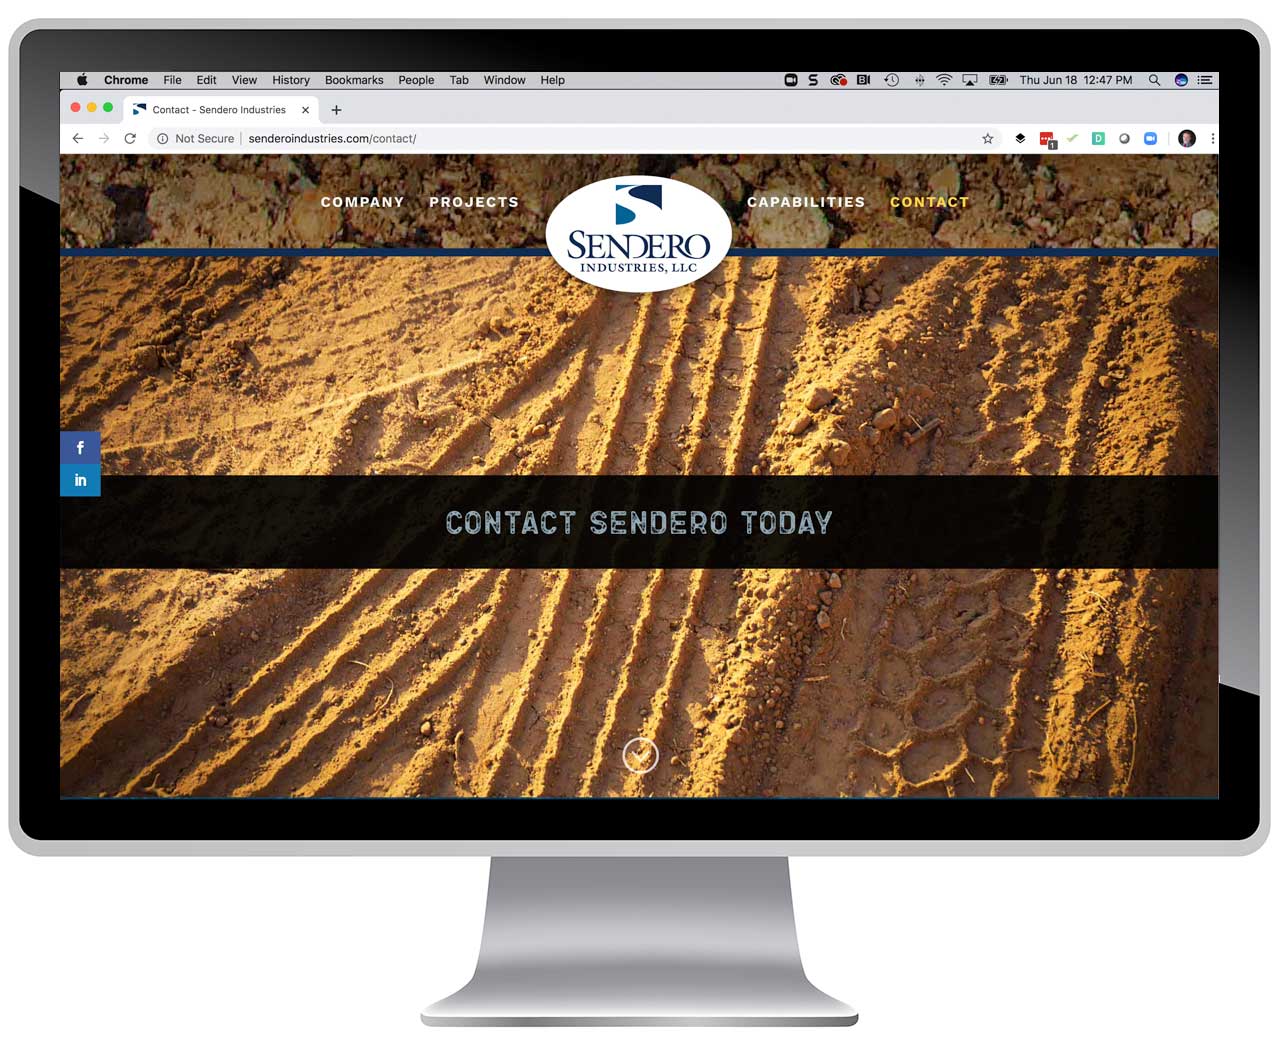 Contact page of custom website for construction company.